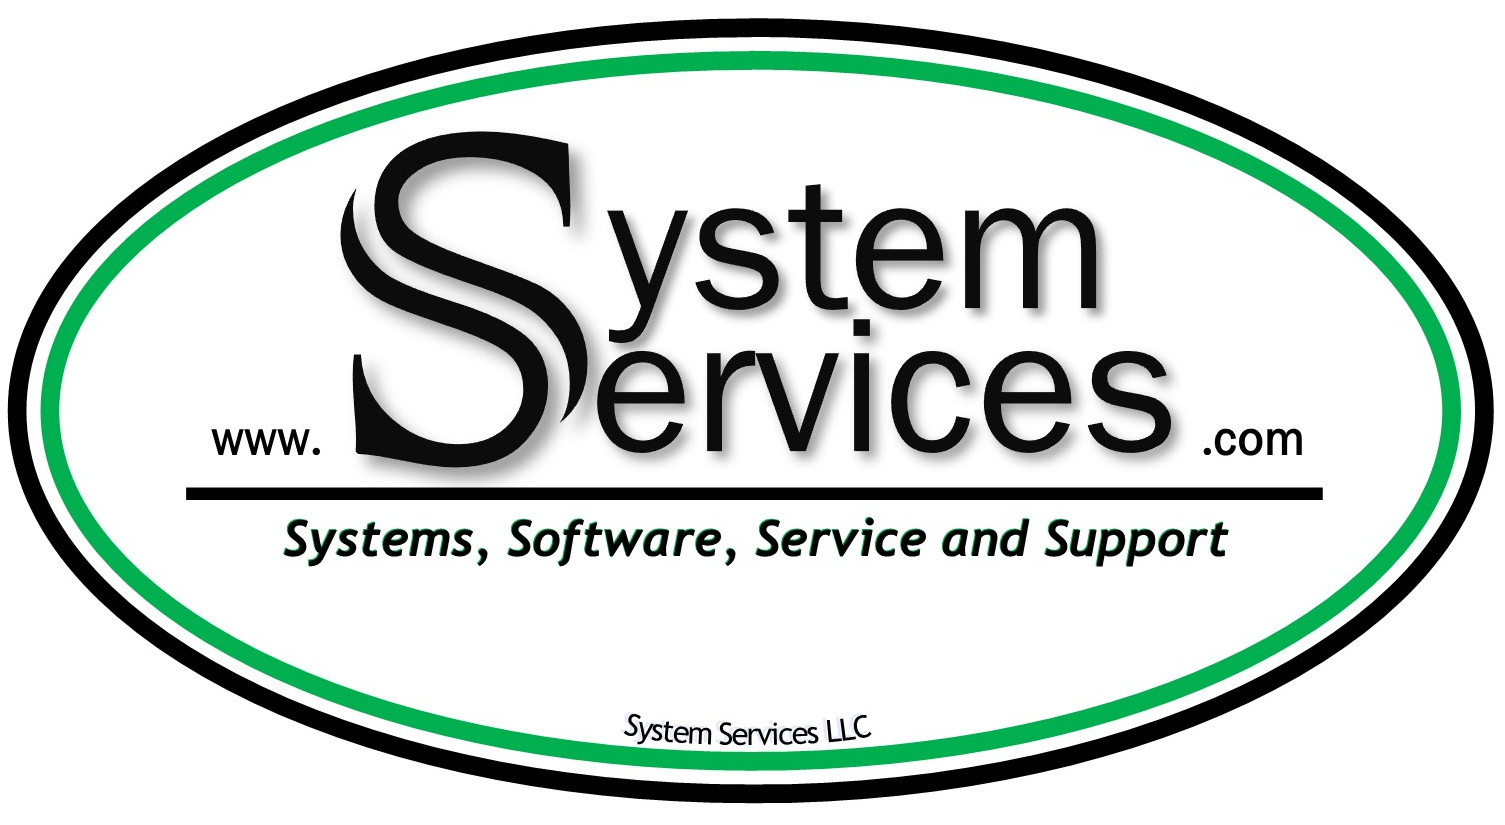 www.SystemServices.com